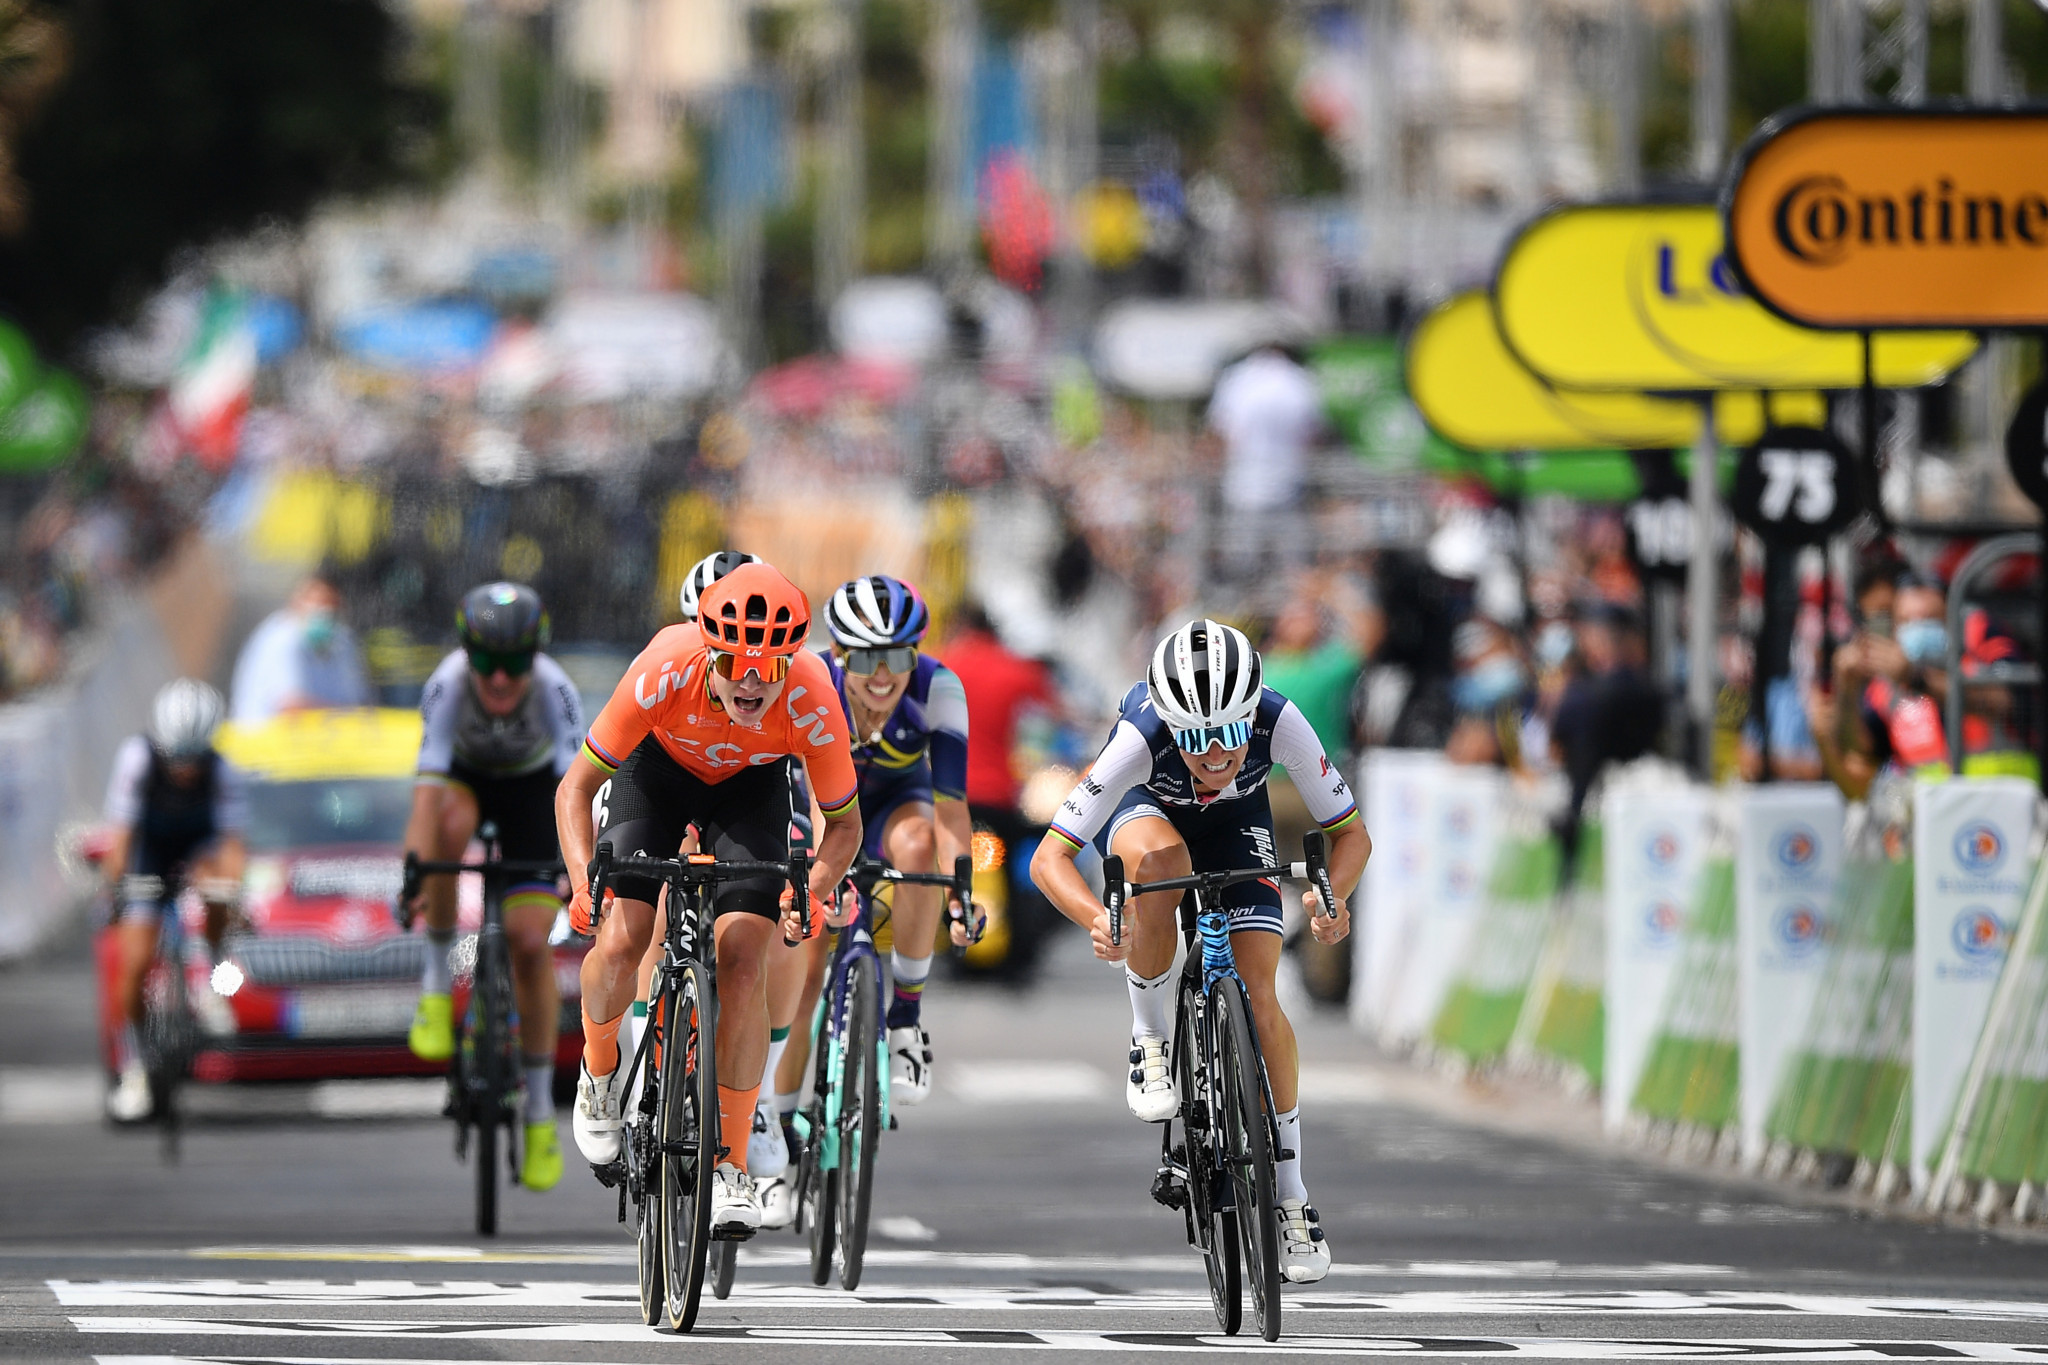 Eight-day women's Tour de France to launch in 2022 supported by Zwift